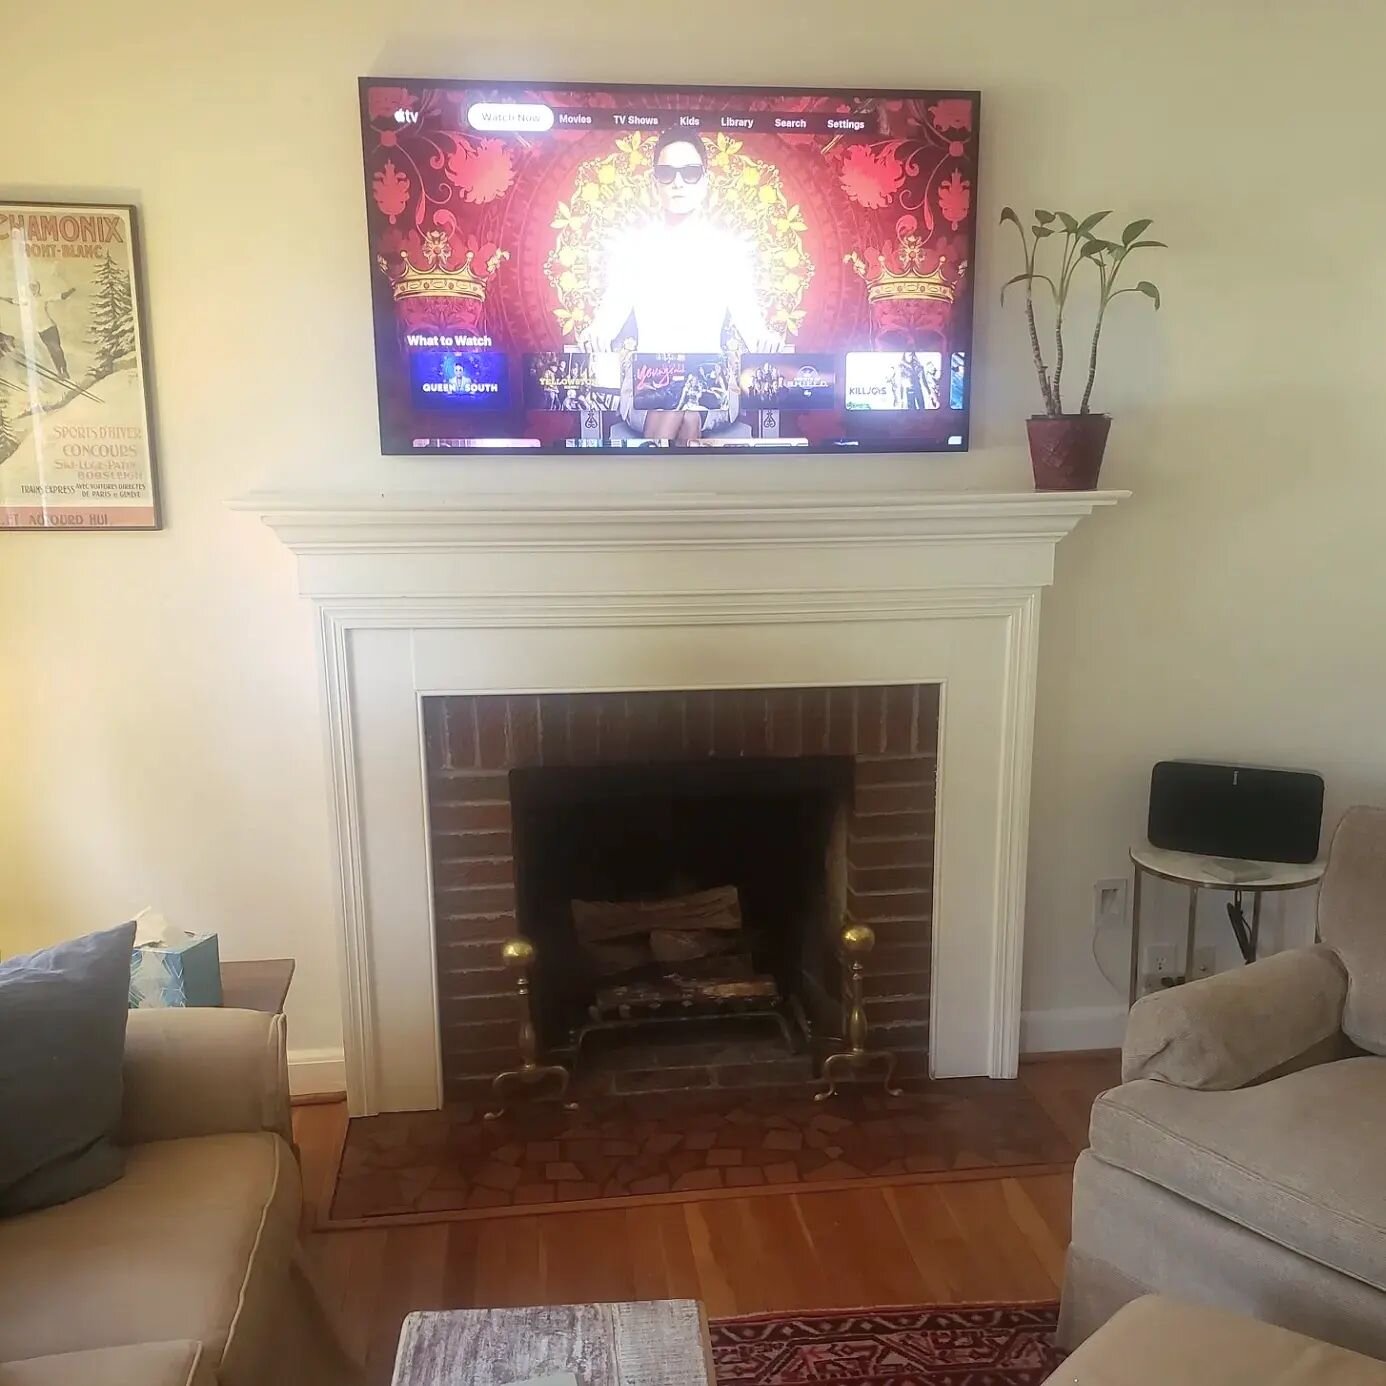 55&quot; @samsungus Frame TV wall mounted with black frame and connected to @sonos wireless speaker. (TV also shown in Art Mode 🖼 ) 

#quality #clarity #craftsmanship #jaaudiorva #audiovisual #audio #video #media #construction #fireplace #interiorde